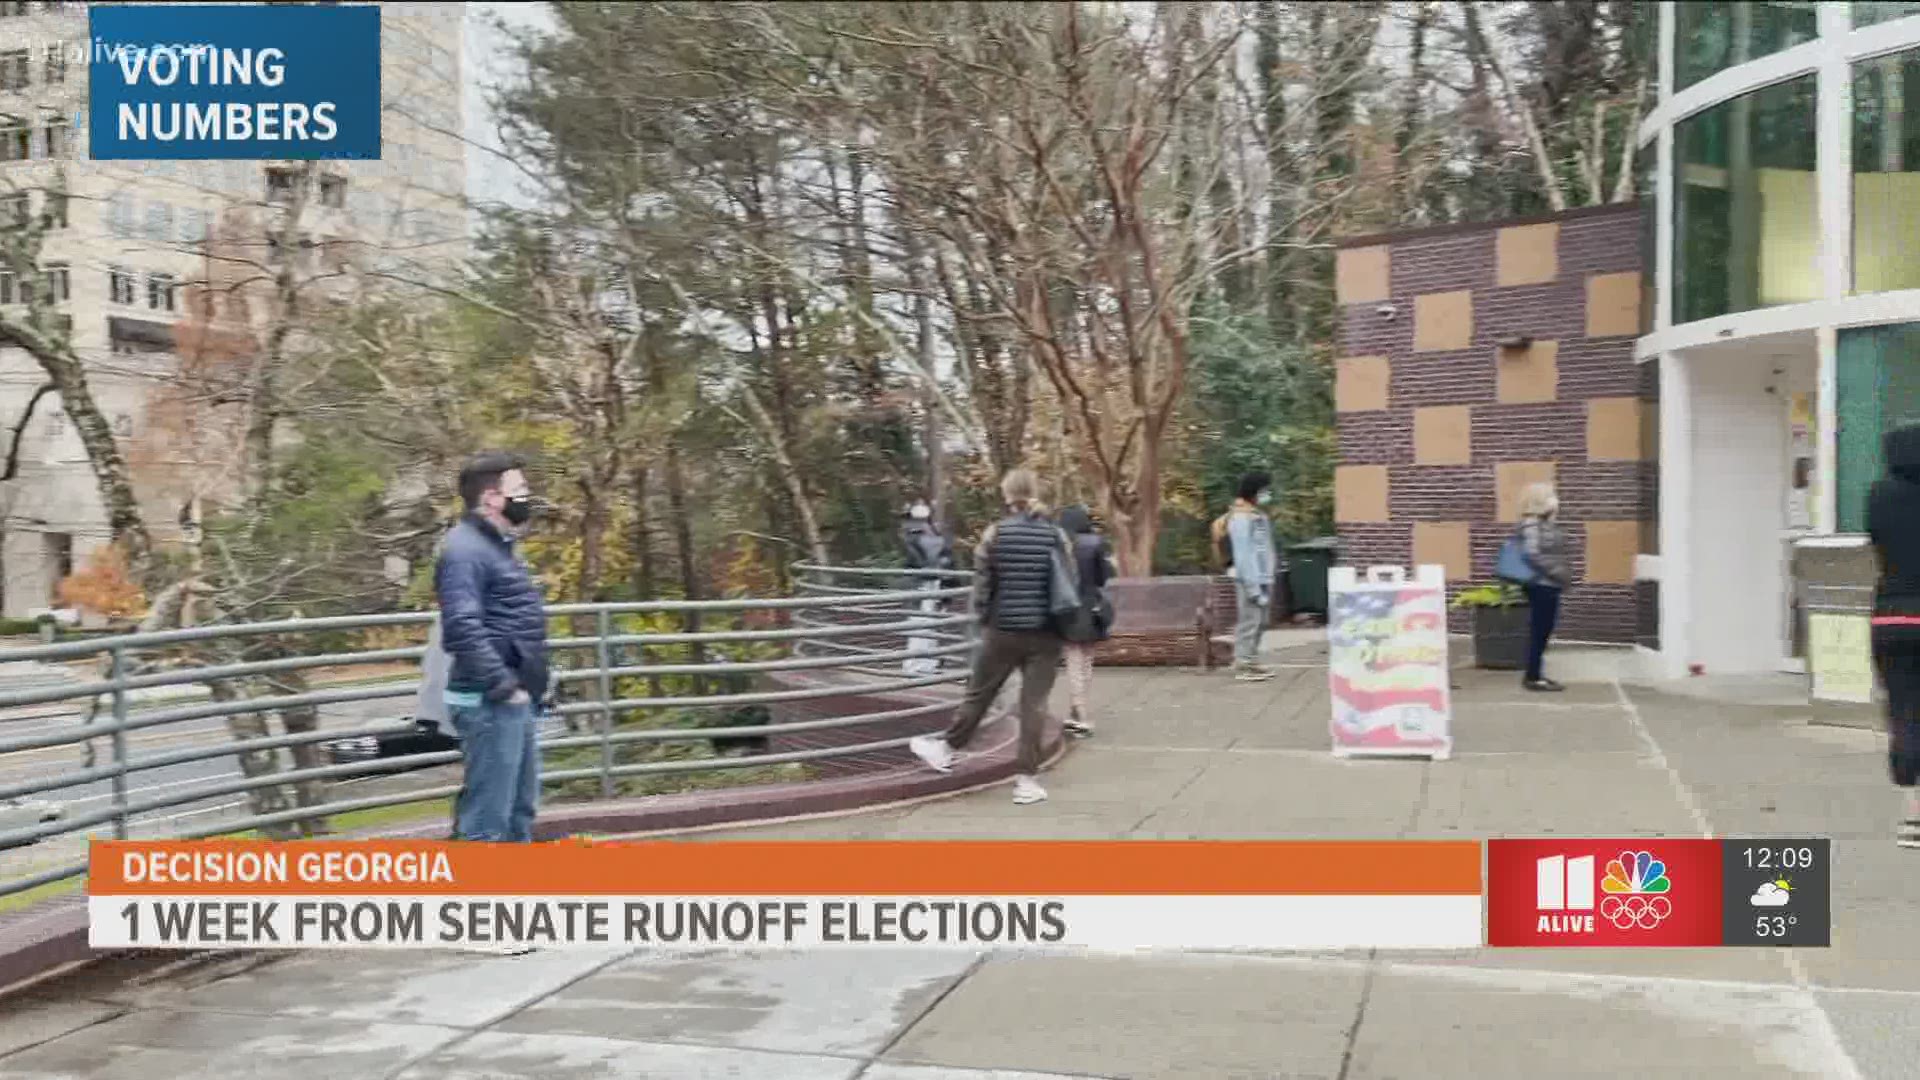 Election Day is Jan. 5 for the Senate races.